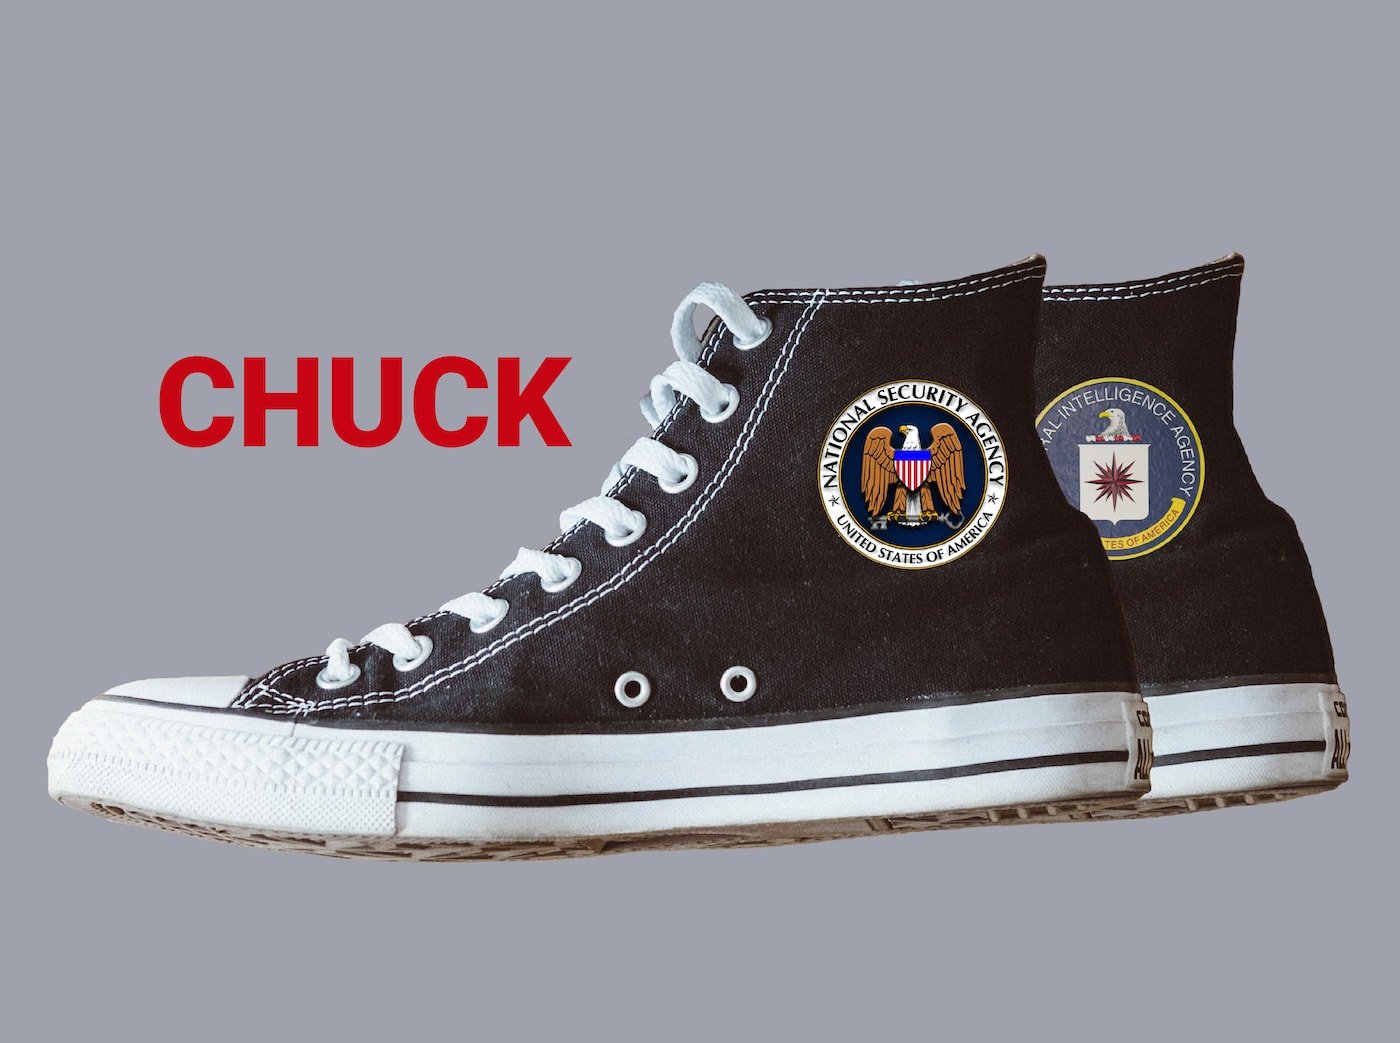 A pair of van-type sneakers - the labels replaced with FBI and CIA logos